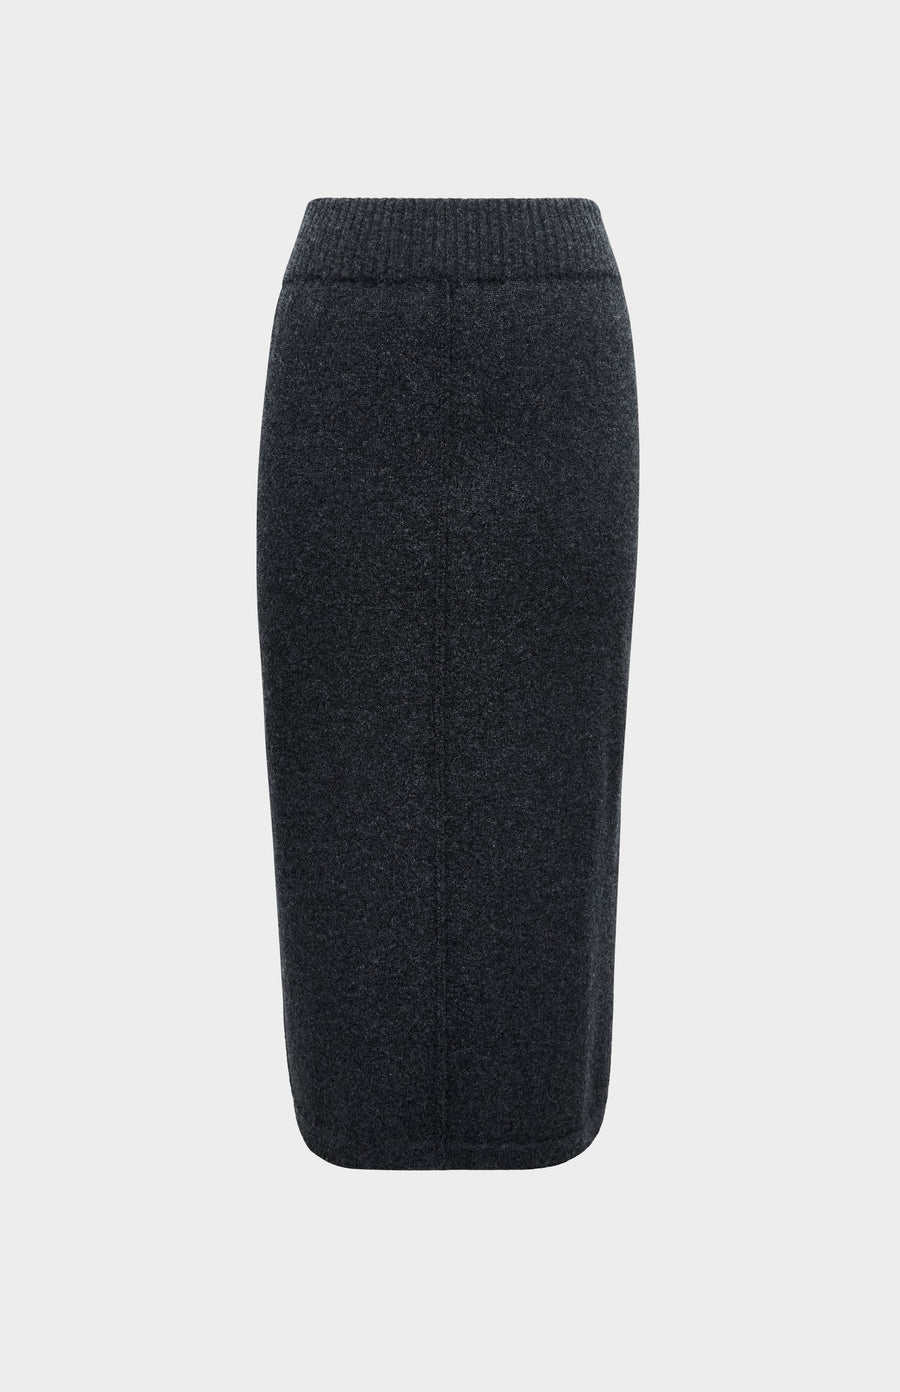 Pringle of Scotland Cashmere Blend Pencil Skirt in Charcoal flat shot